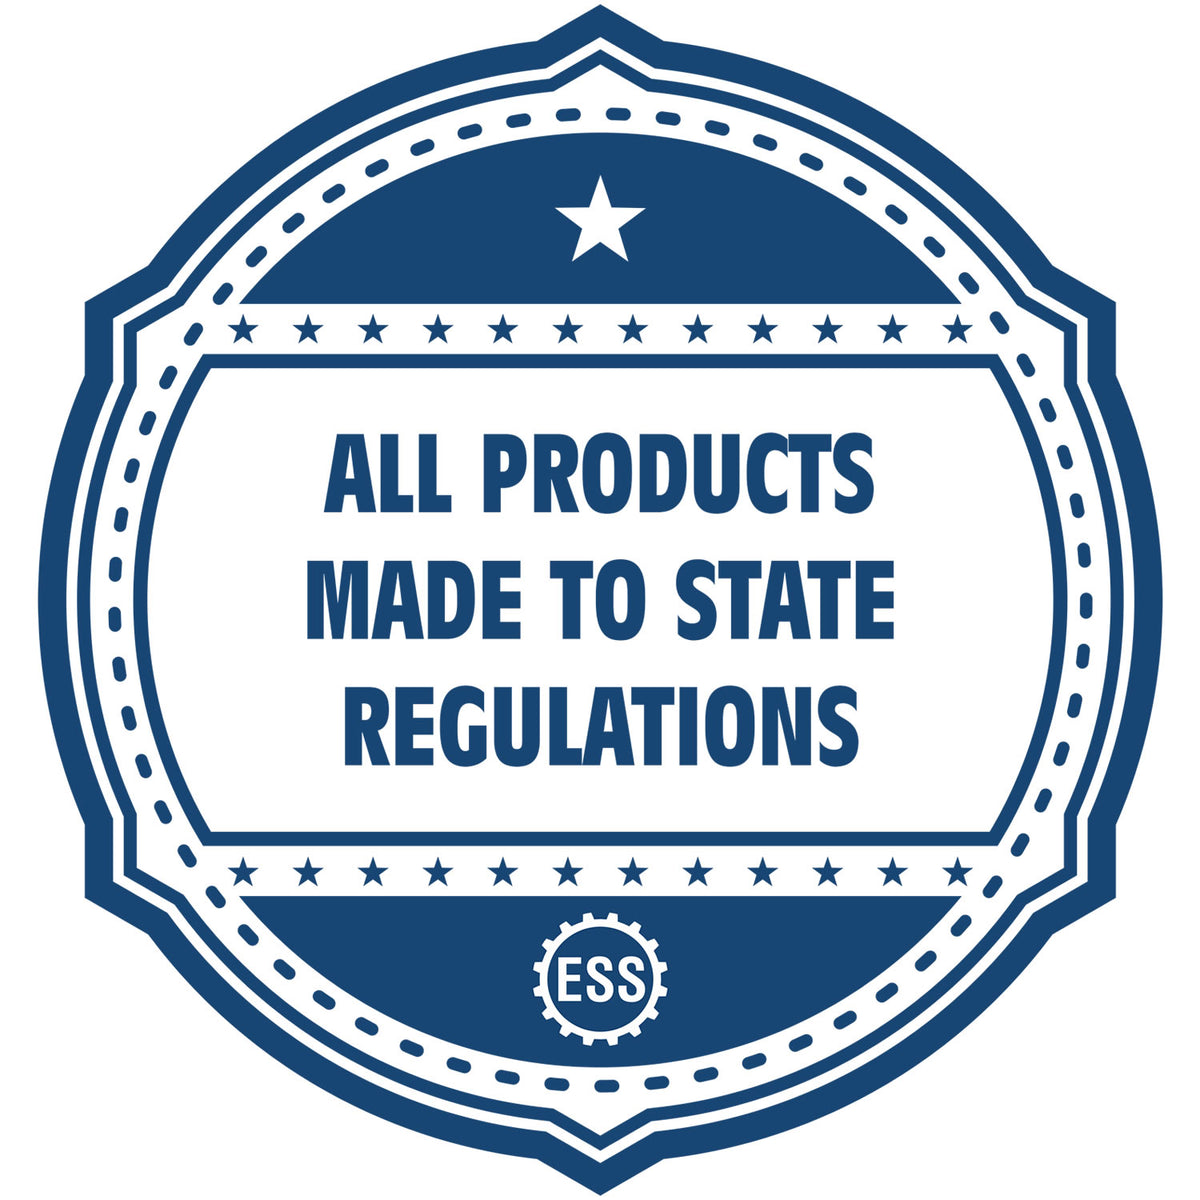 A blue icon or badge for the Gift Pennsylvania Landscape Architect Seal showing that this product is made in compliance with state regulations.